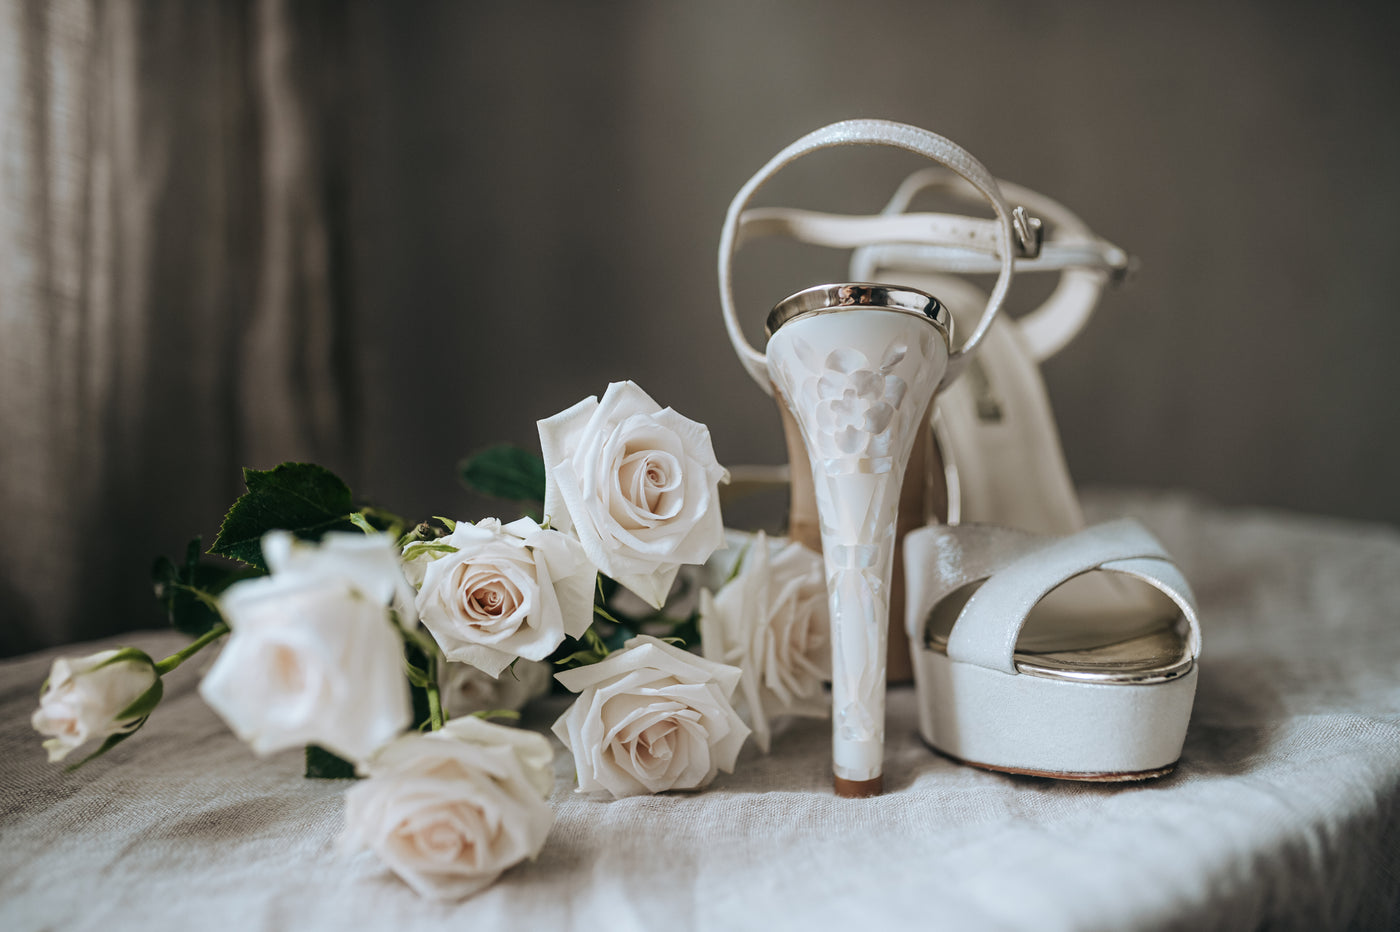 How Will Different Freya Rose Wedding Shoes Complement You?